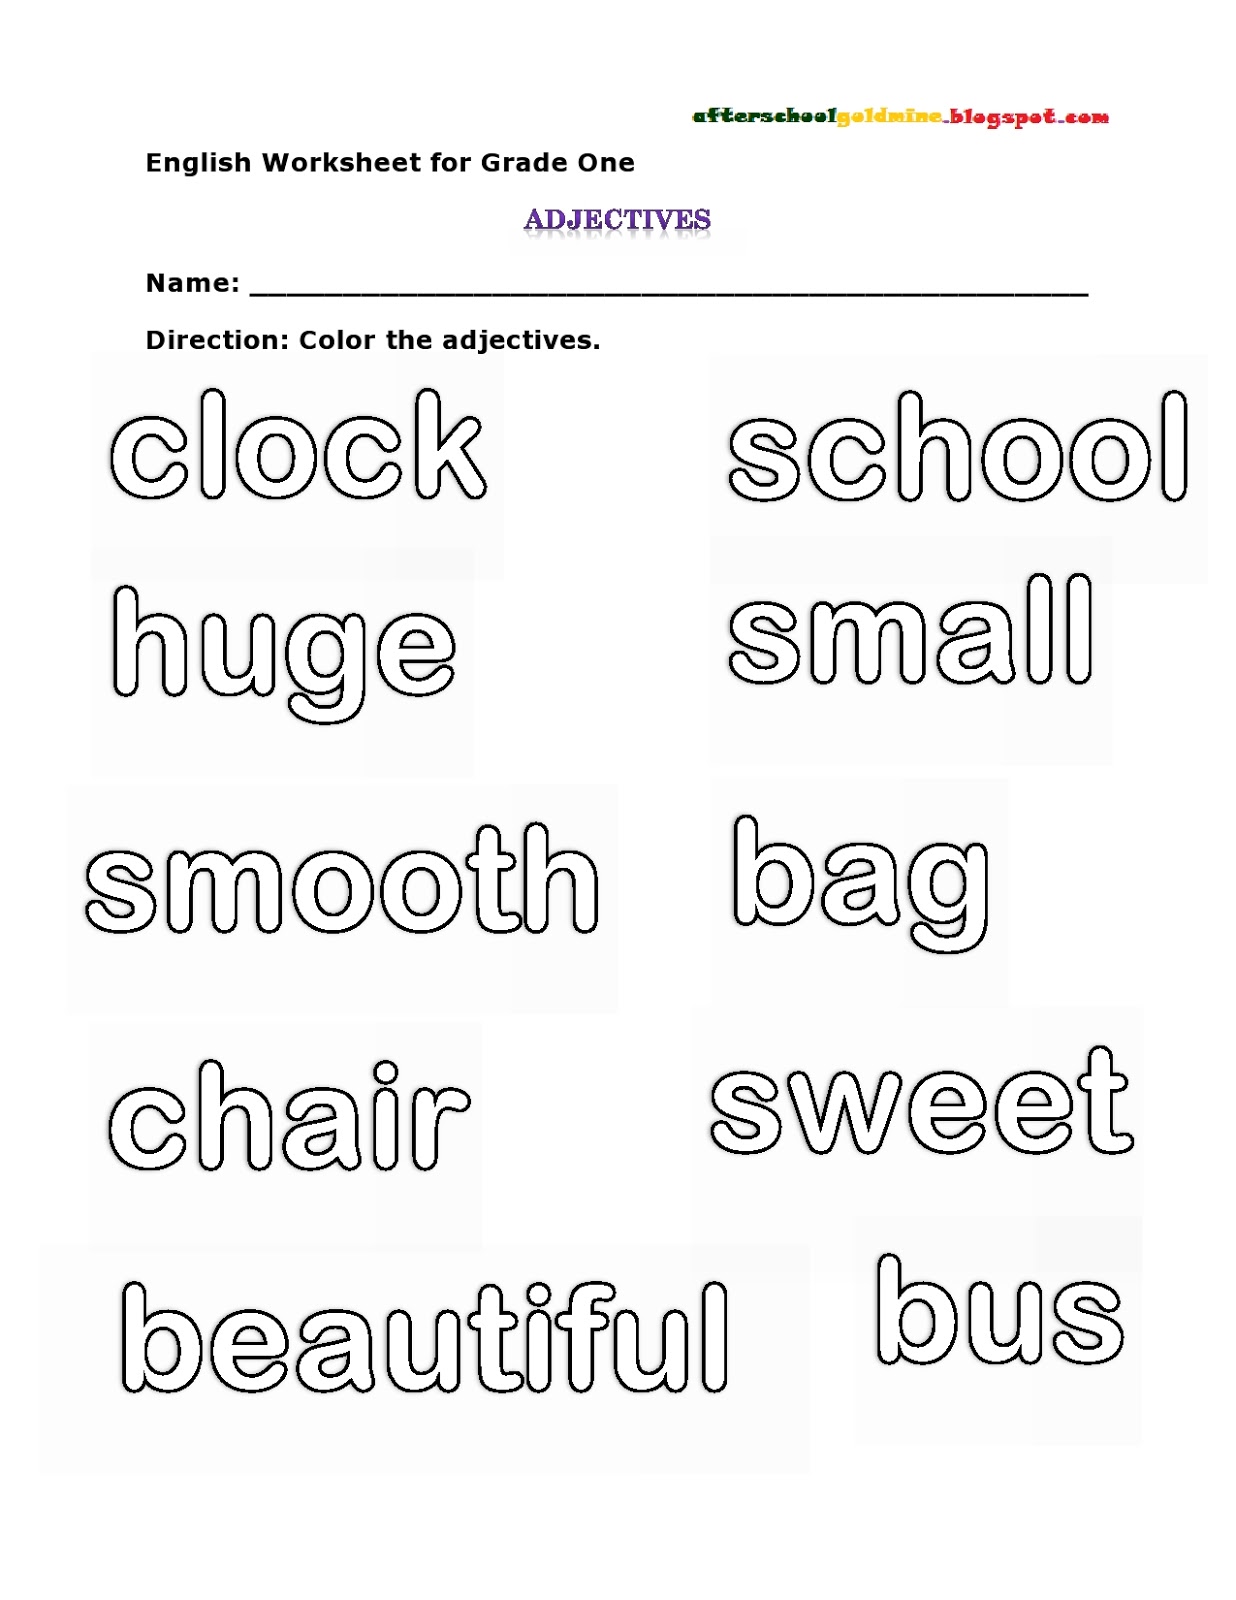 Worksheets For Grade 4 English Adjectives